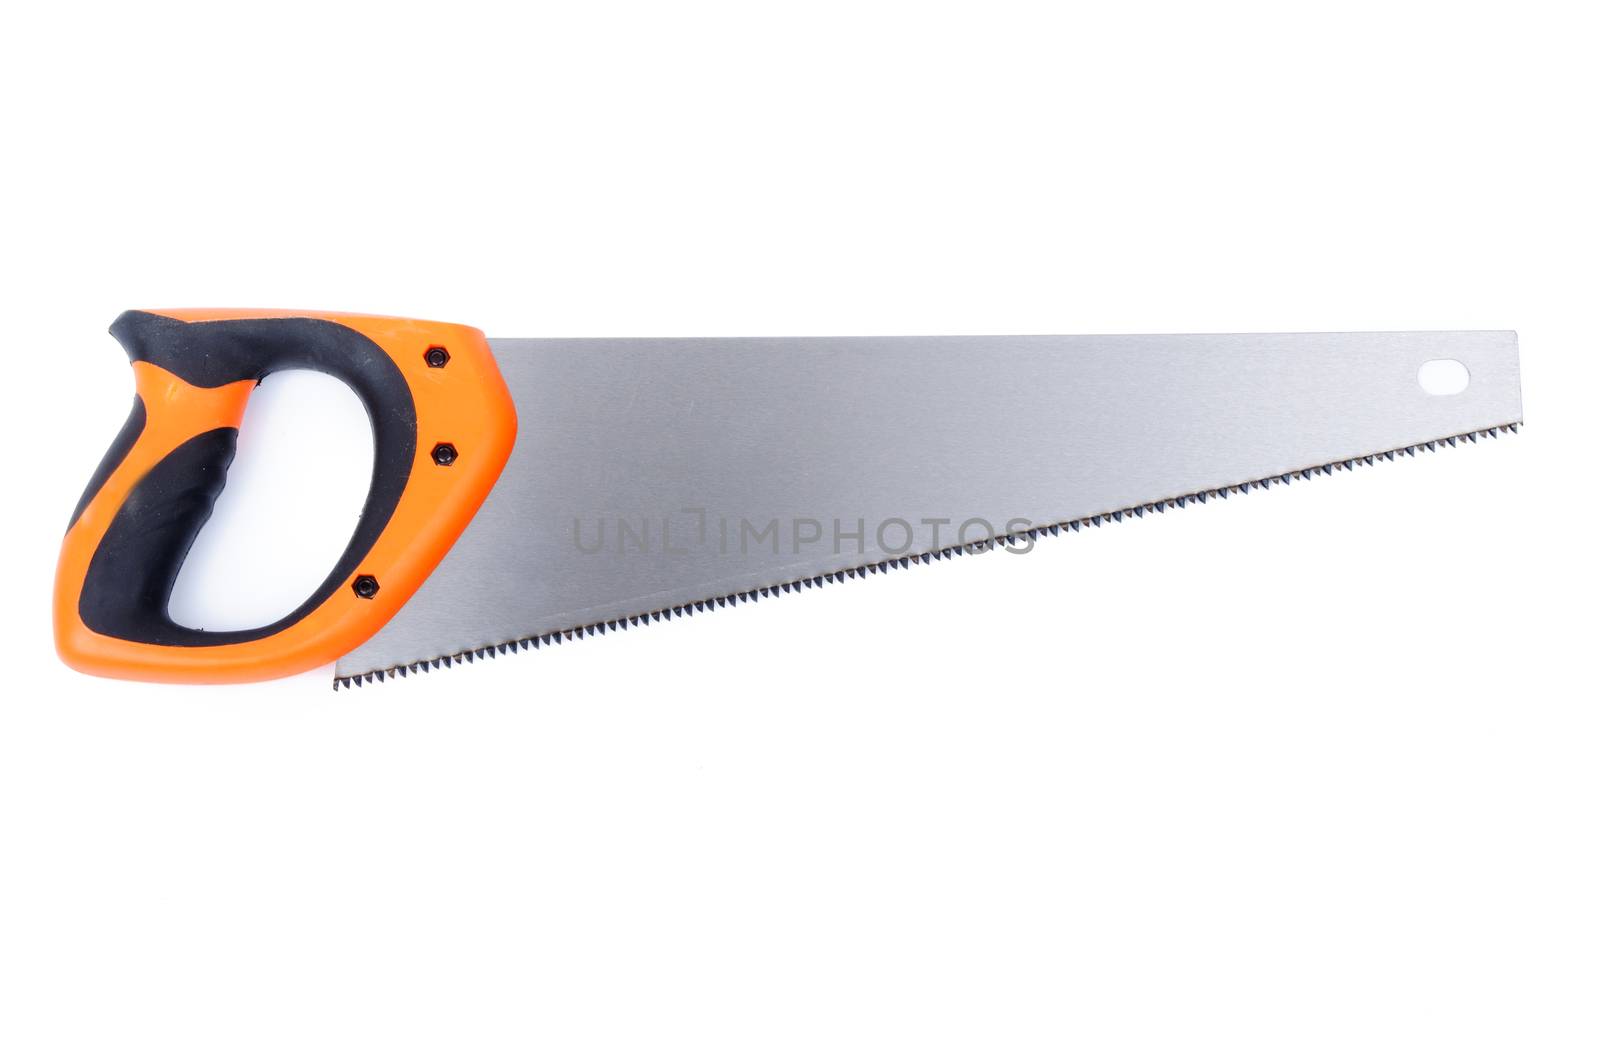 Hand saw by velkol